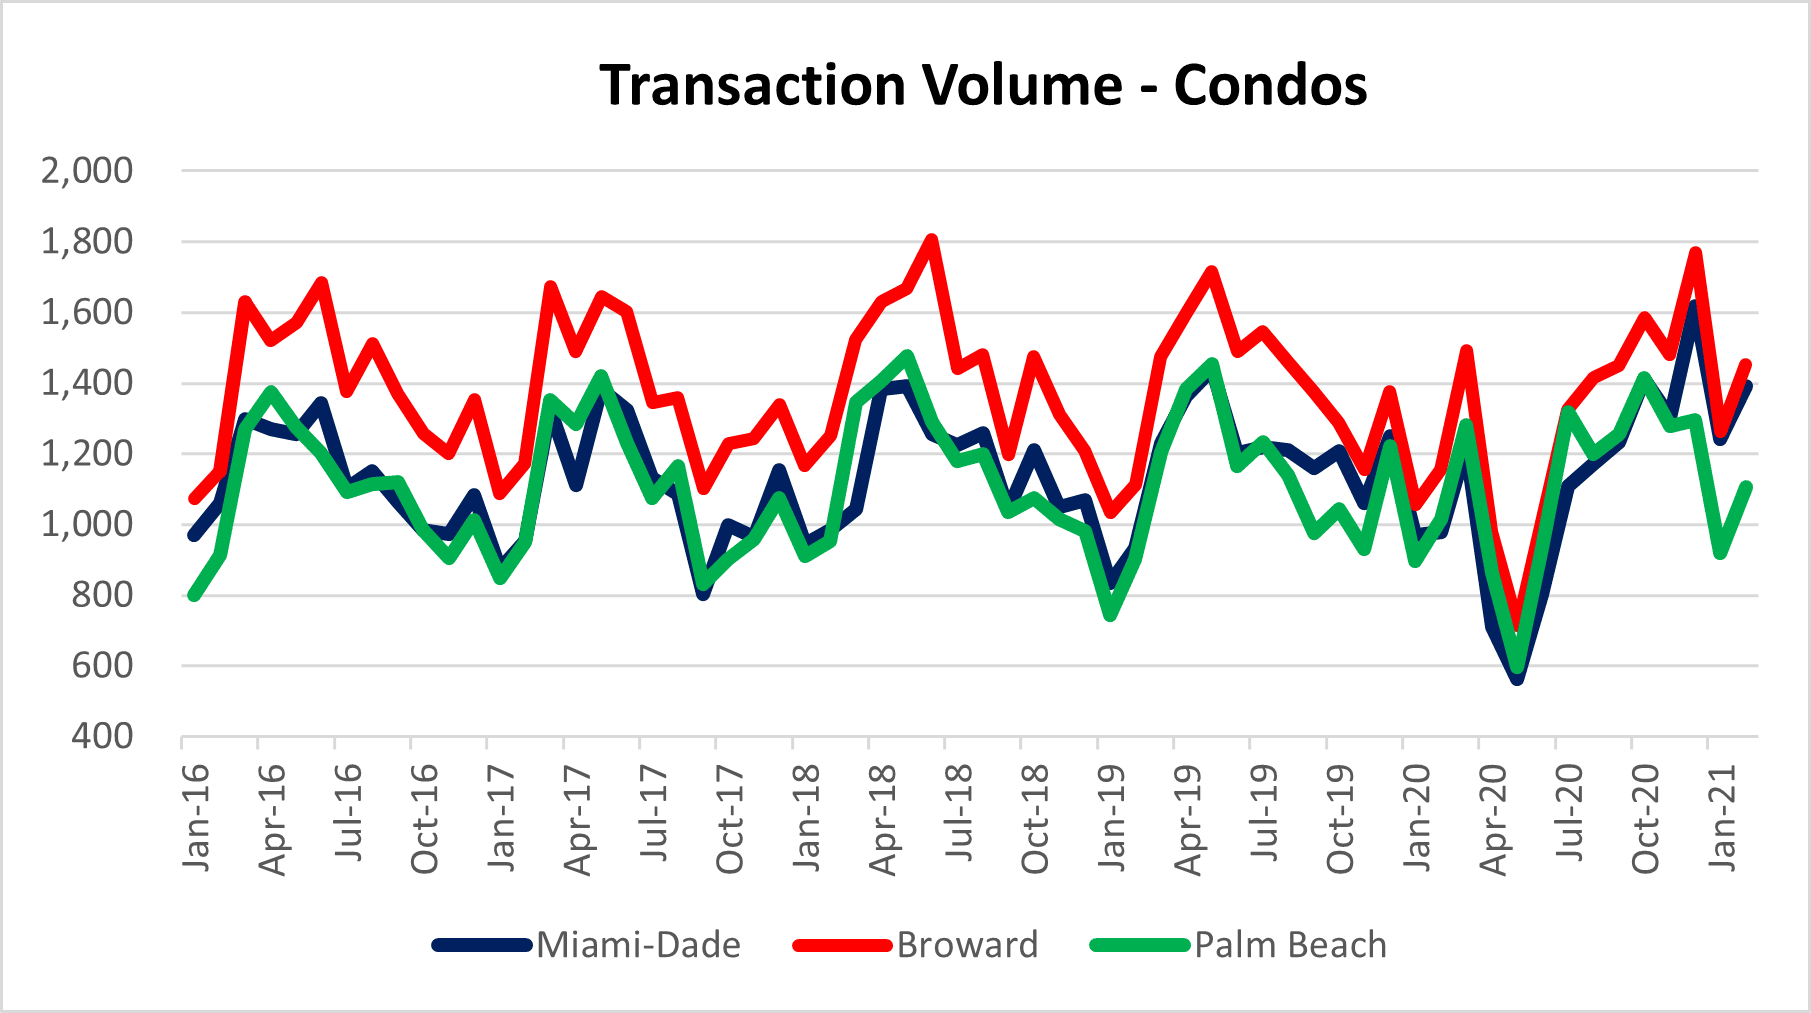 Condo sales in Miami, Fort Lauderdale and Palm beach